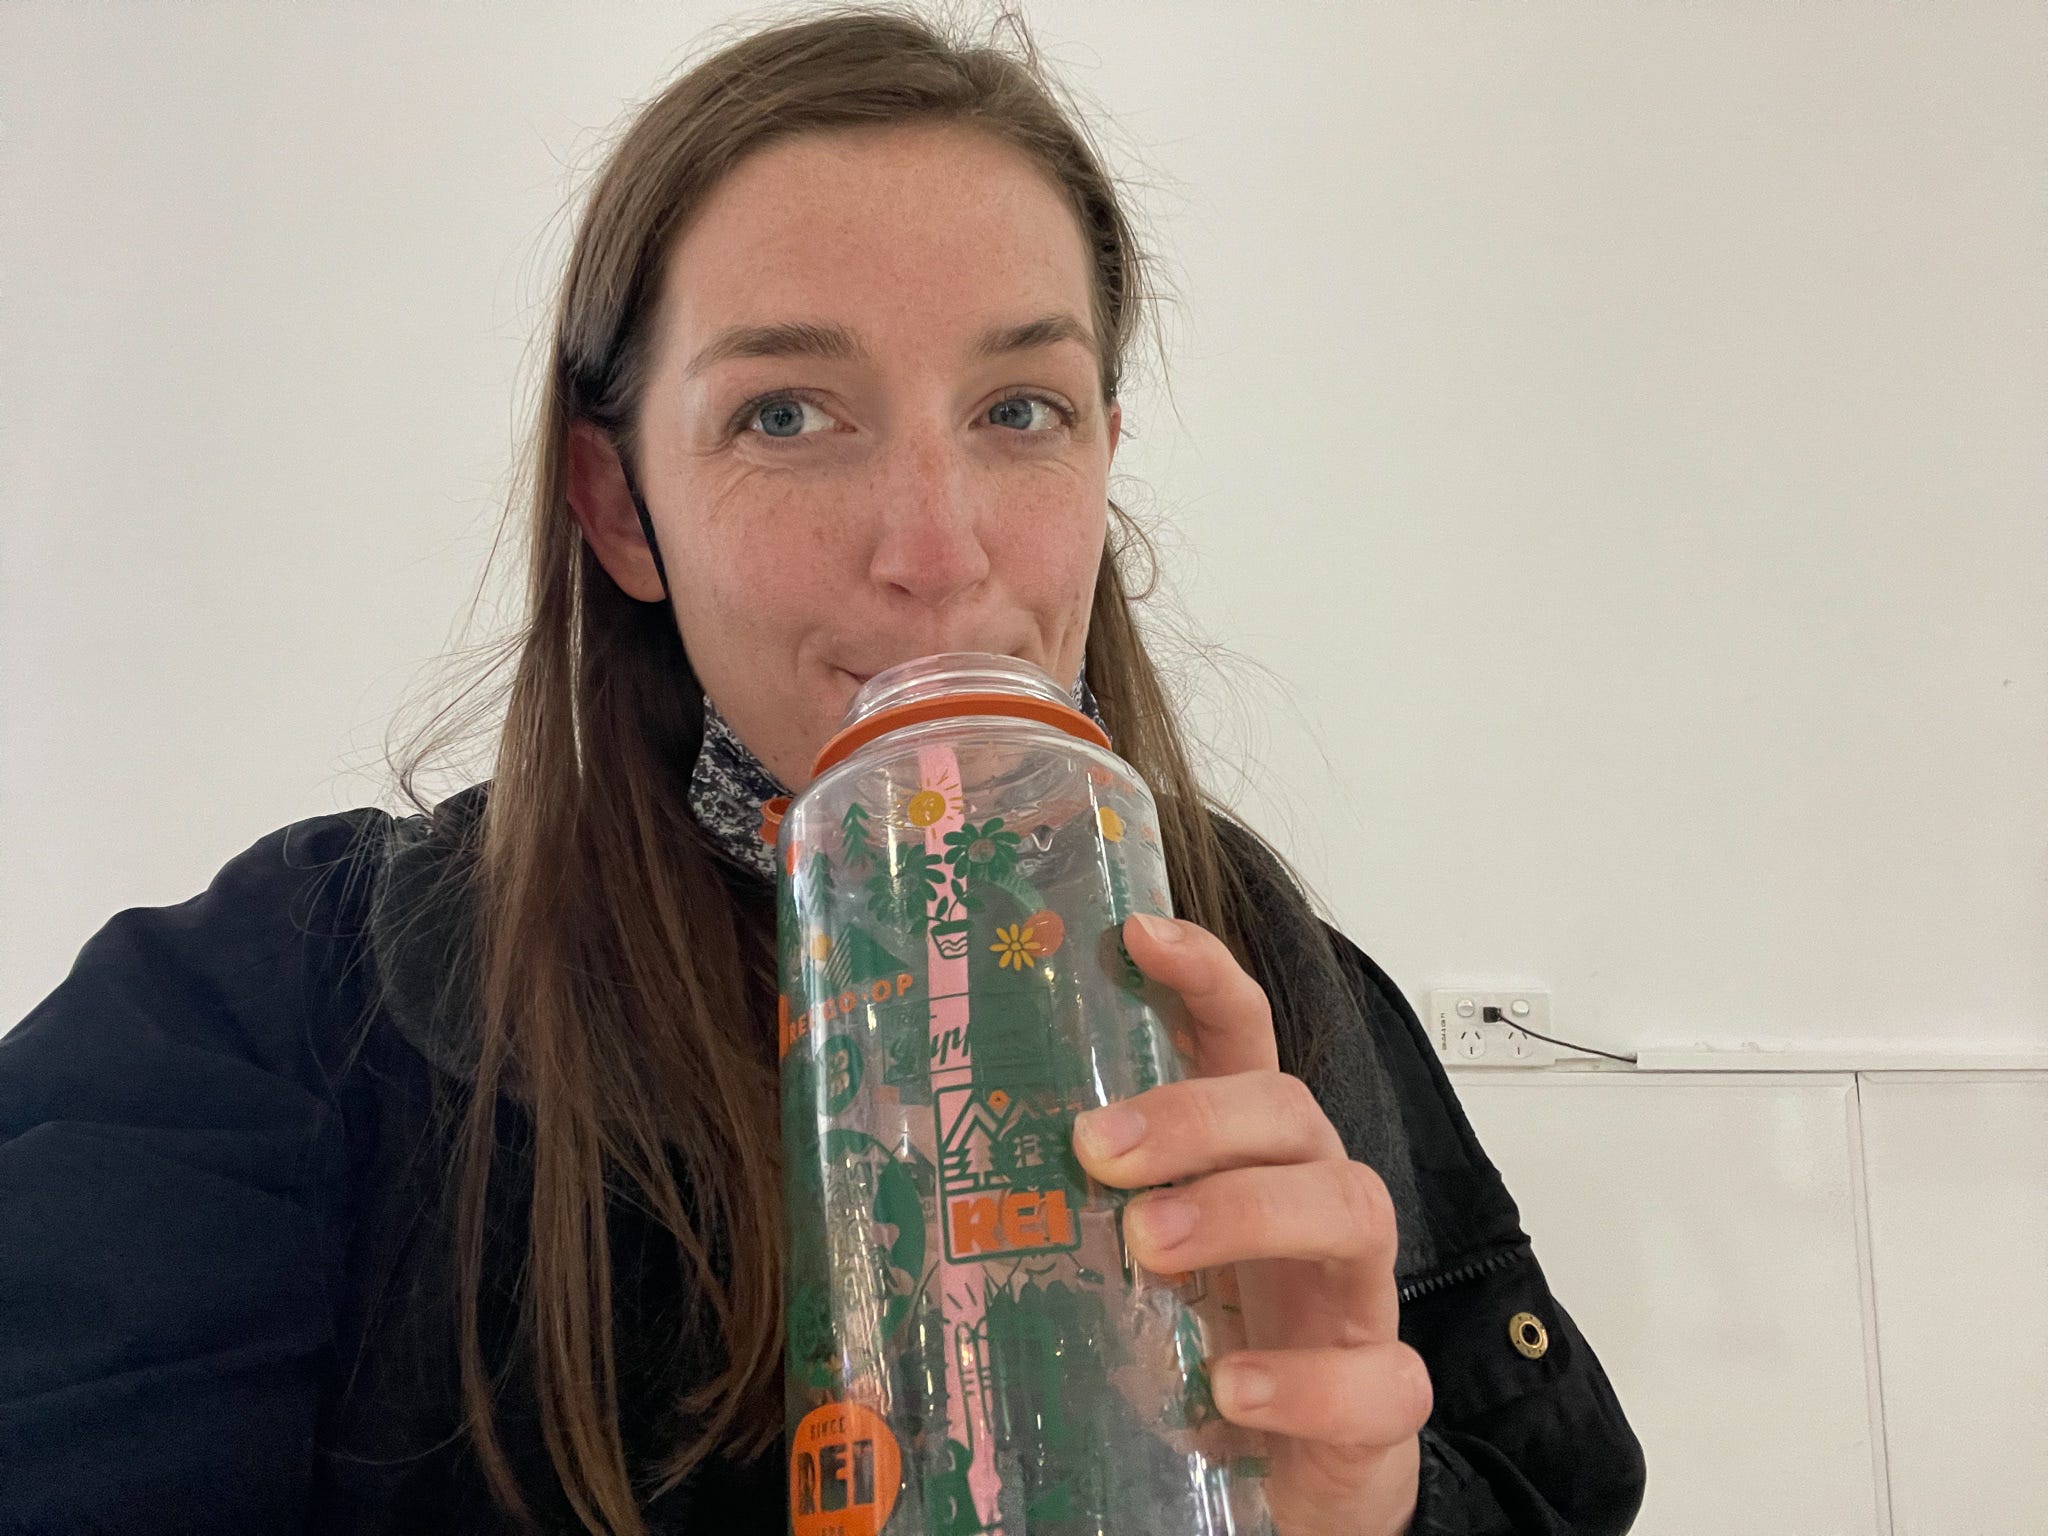 <p>Humphries never travels anywhere without her reusable water bottle. It helps her stay hydrated and save money, while <a href="https://www.insider.com/how-to-travel-more-sustainably-without-harming-destinations-2022-9">traveling more sustainably</a>.</p><p>She calculated that her 32-ounce, refillable water bottle prevented her from wasting 24 water bottles — and up to $120 — on the four long-haul flights she took this past year.</p><p><a href="https://www.insider.com/travel-reporter-must-pack-long-haul-flight-water-bottle-2023-4">Read more.</a></p>